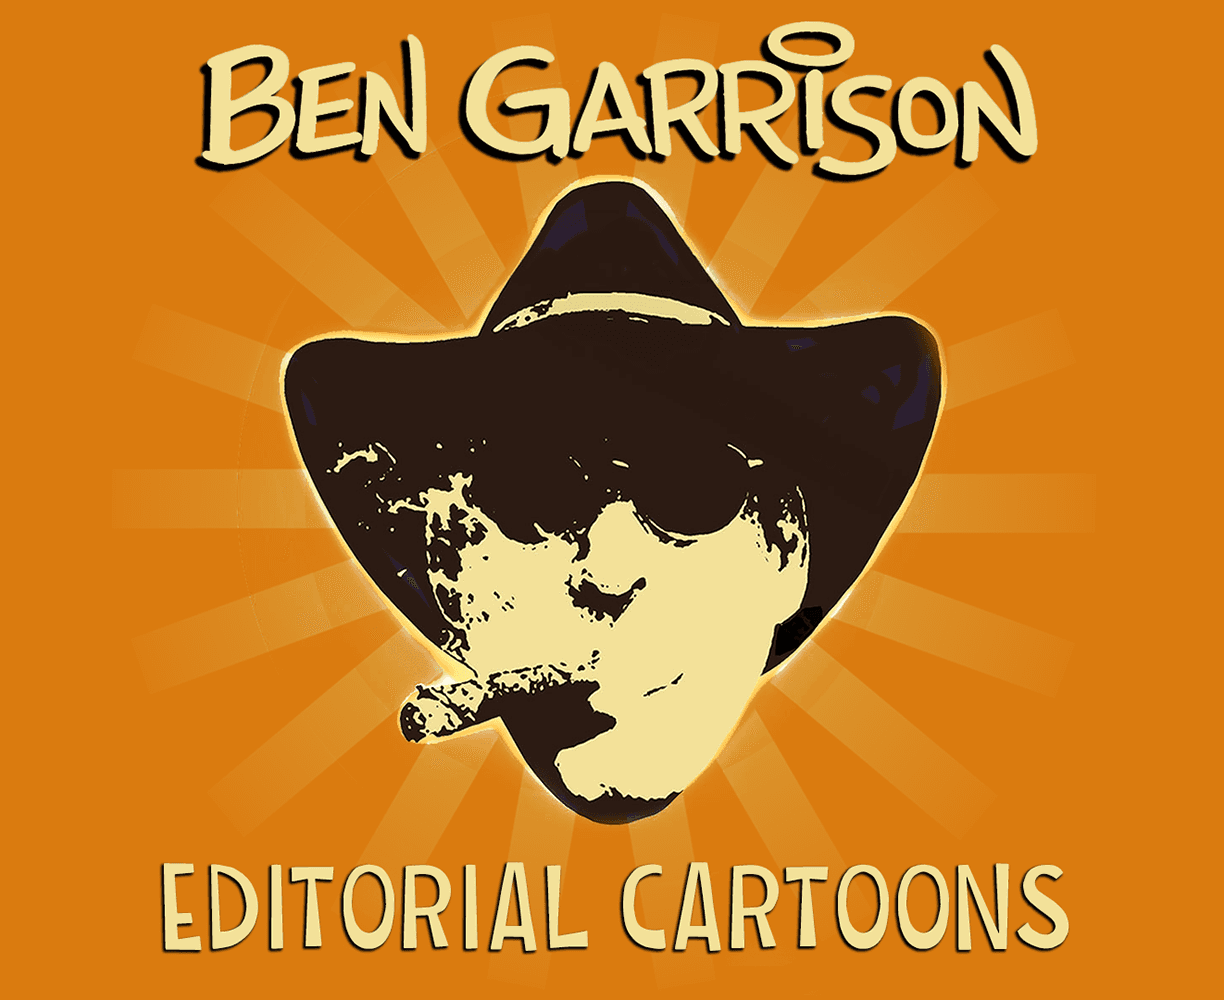 The cover art for the episode Biden Blames Guns from the comics series Ben Garrison, which is number 141 in the series